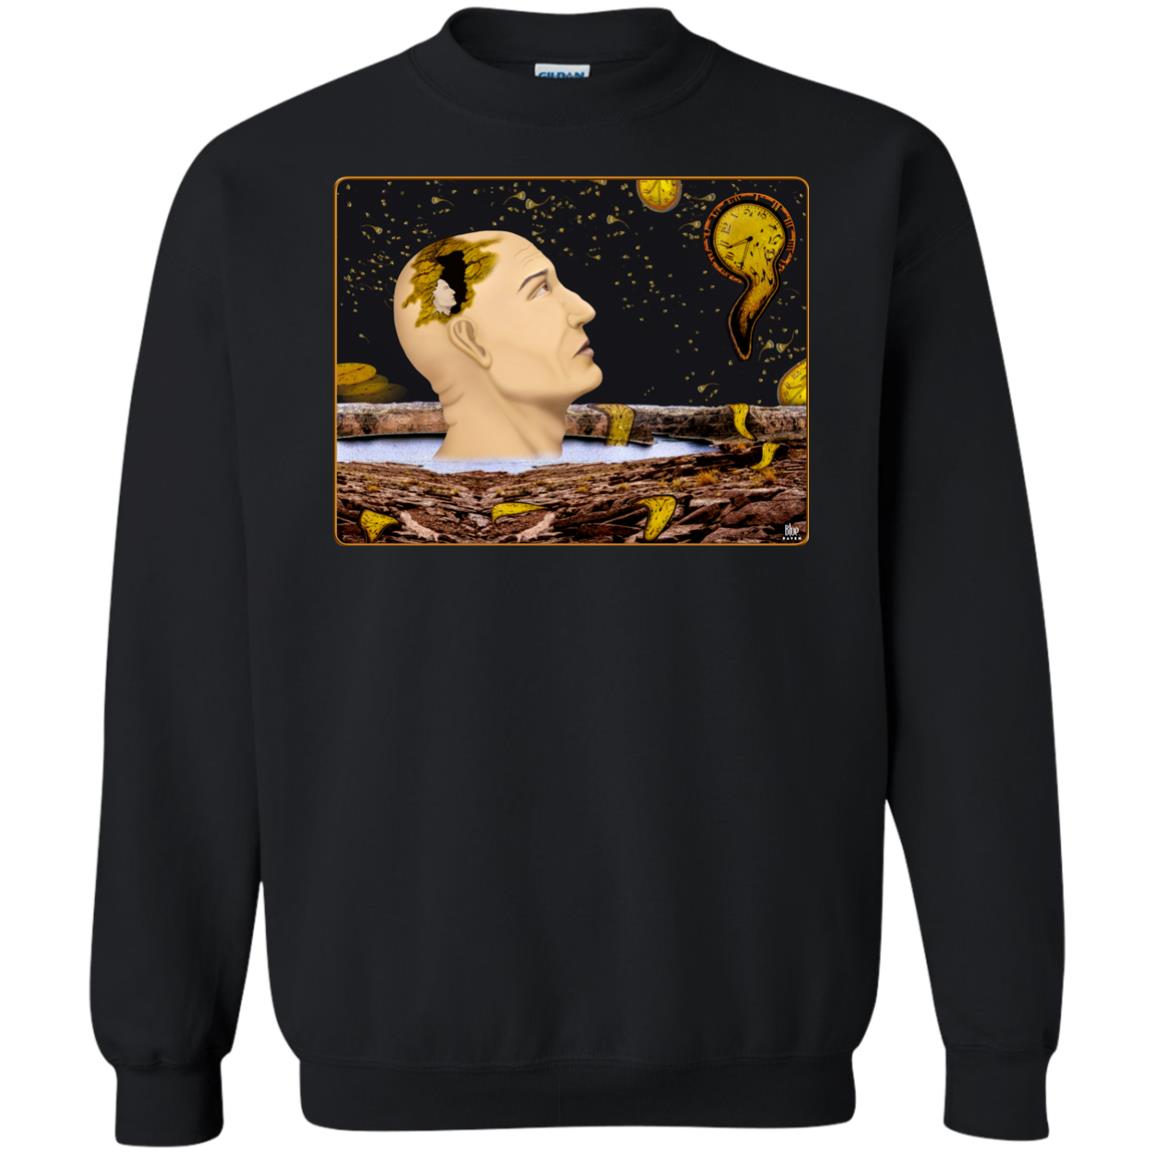 EARTH TIME RUNNING OUT - Men's Crew Neck Sweatshirt